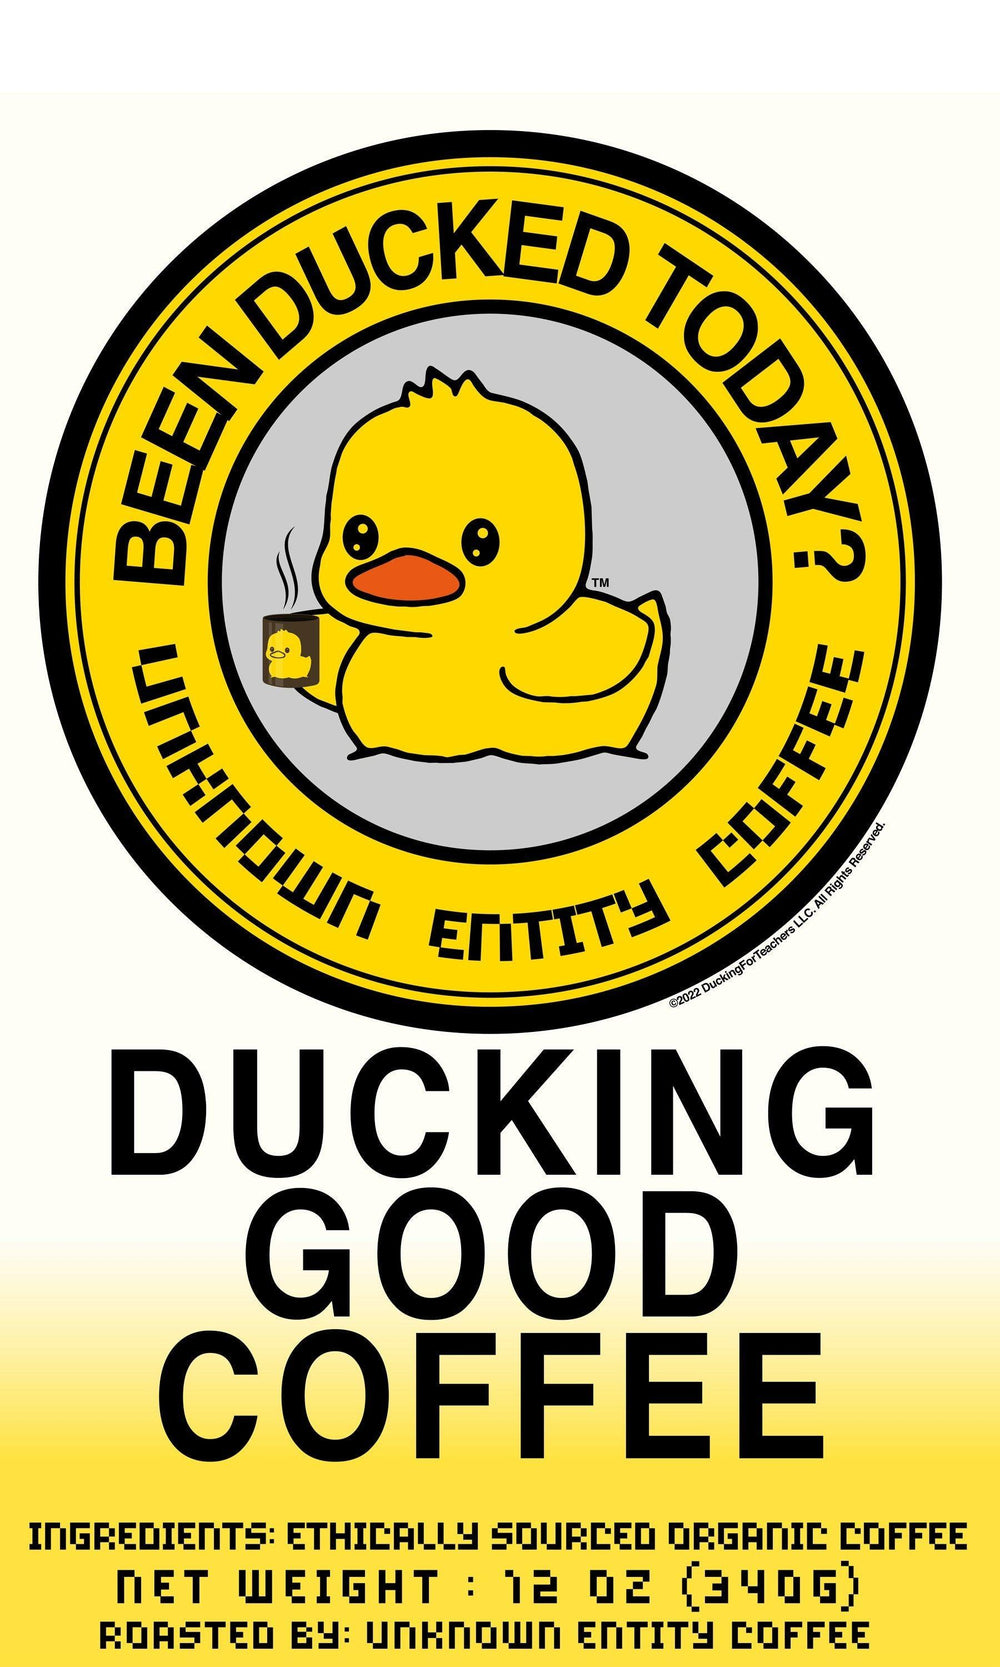 Ducking Good Coffee-Unknown Entity Coffee-blend,collaborations,ducking good,espresso,roasted coffee,subscription,washed,whole bean